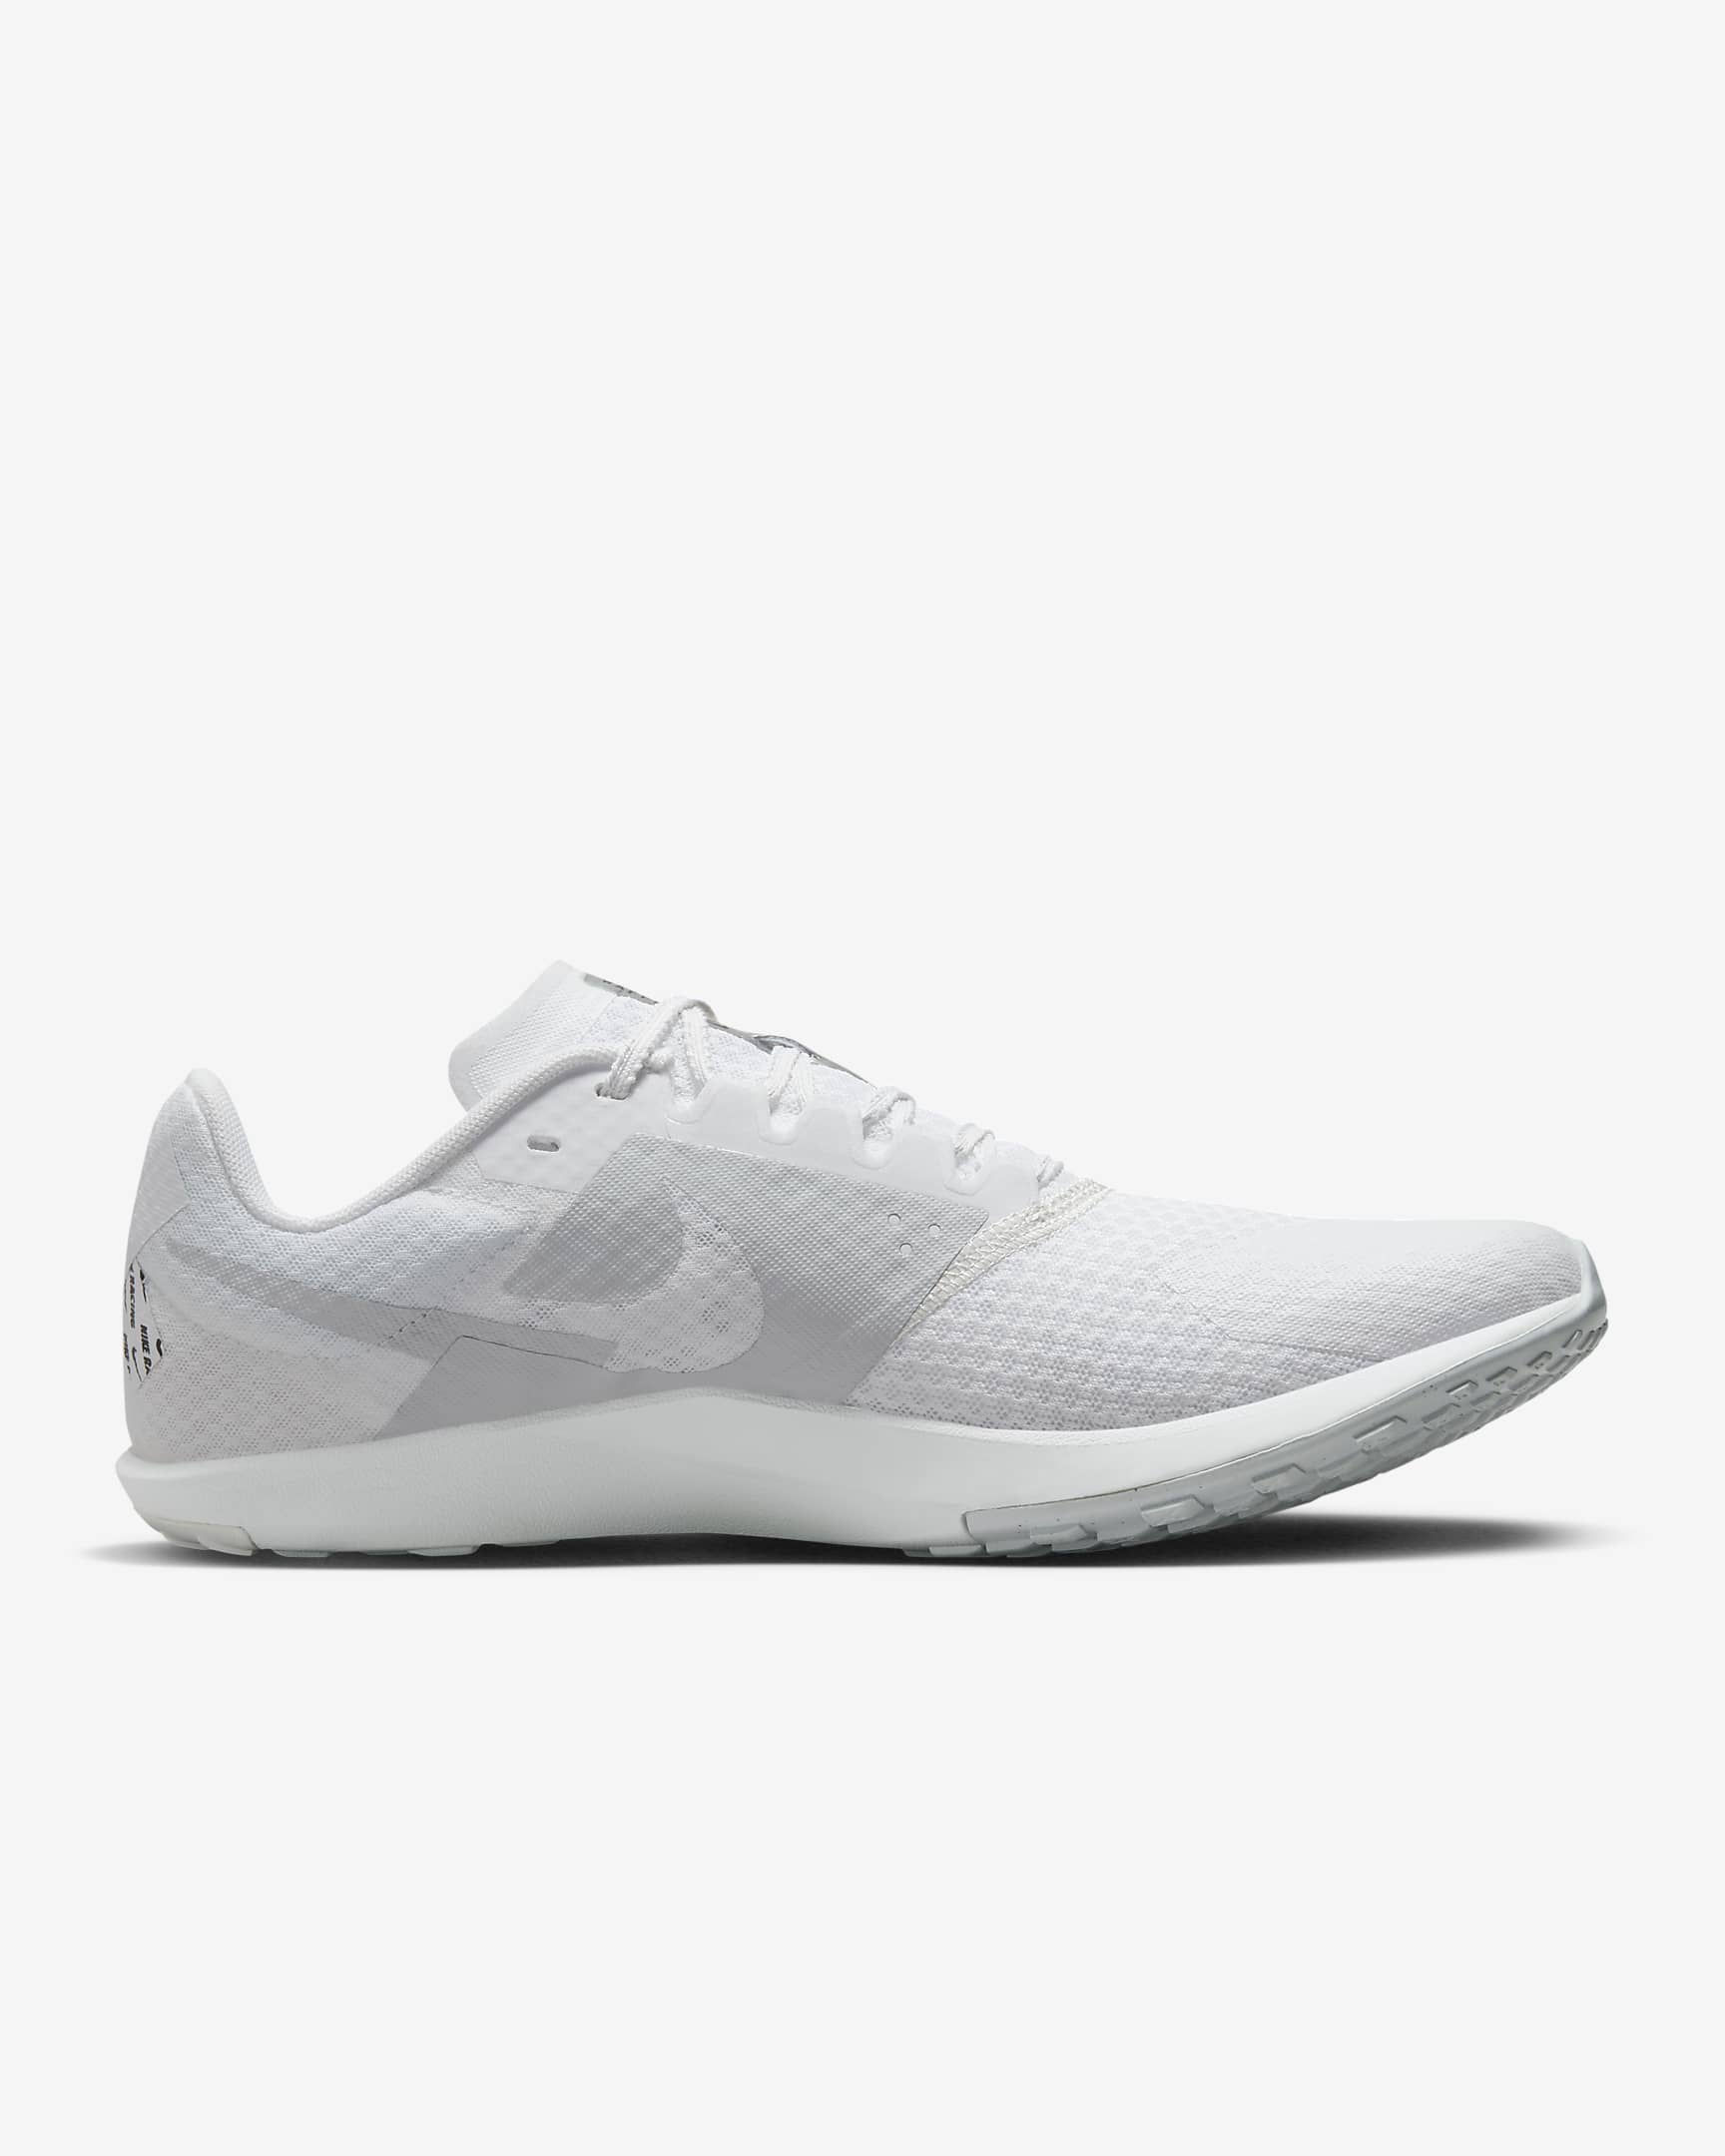 Nike Rival Waffle 6 Road and Cross-Country Racing Shoes - White/Pure Platinum/Metallic Silver/Black